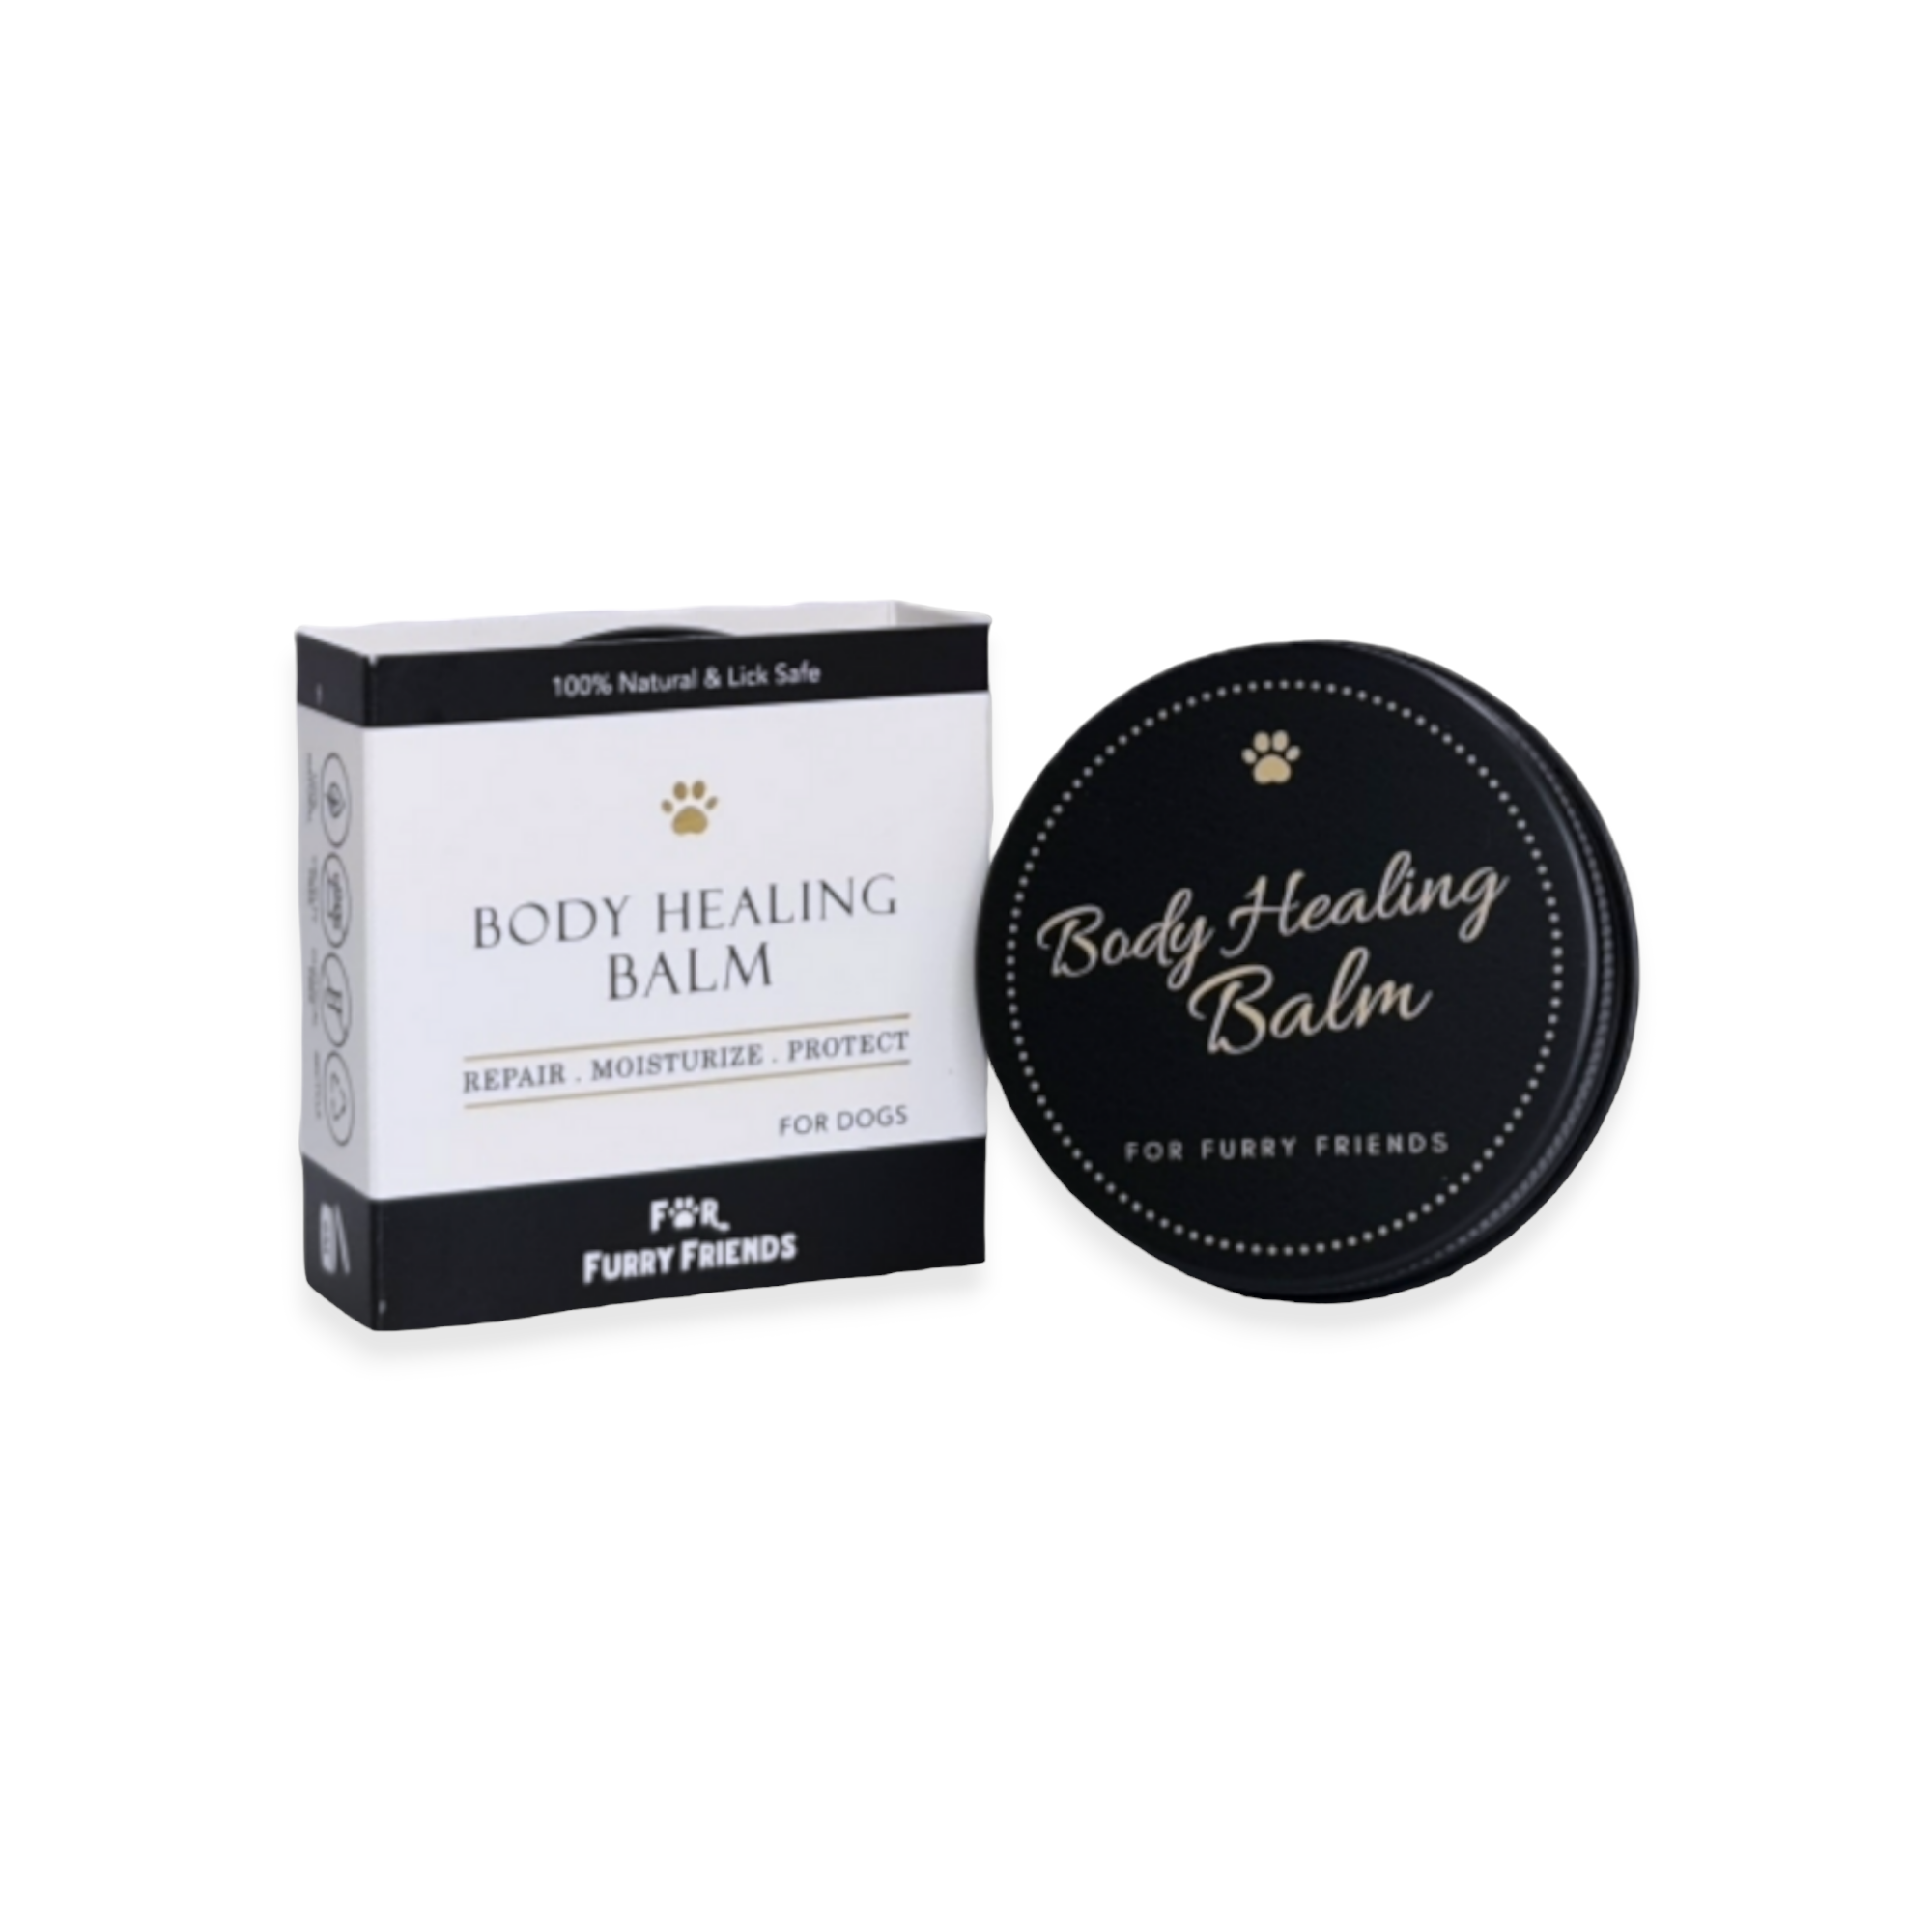 For Furry Friends - Body Healing Balm for Dogs (40g)